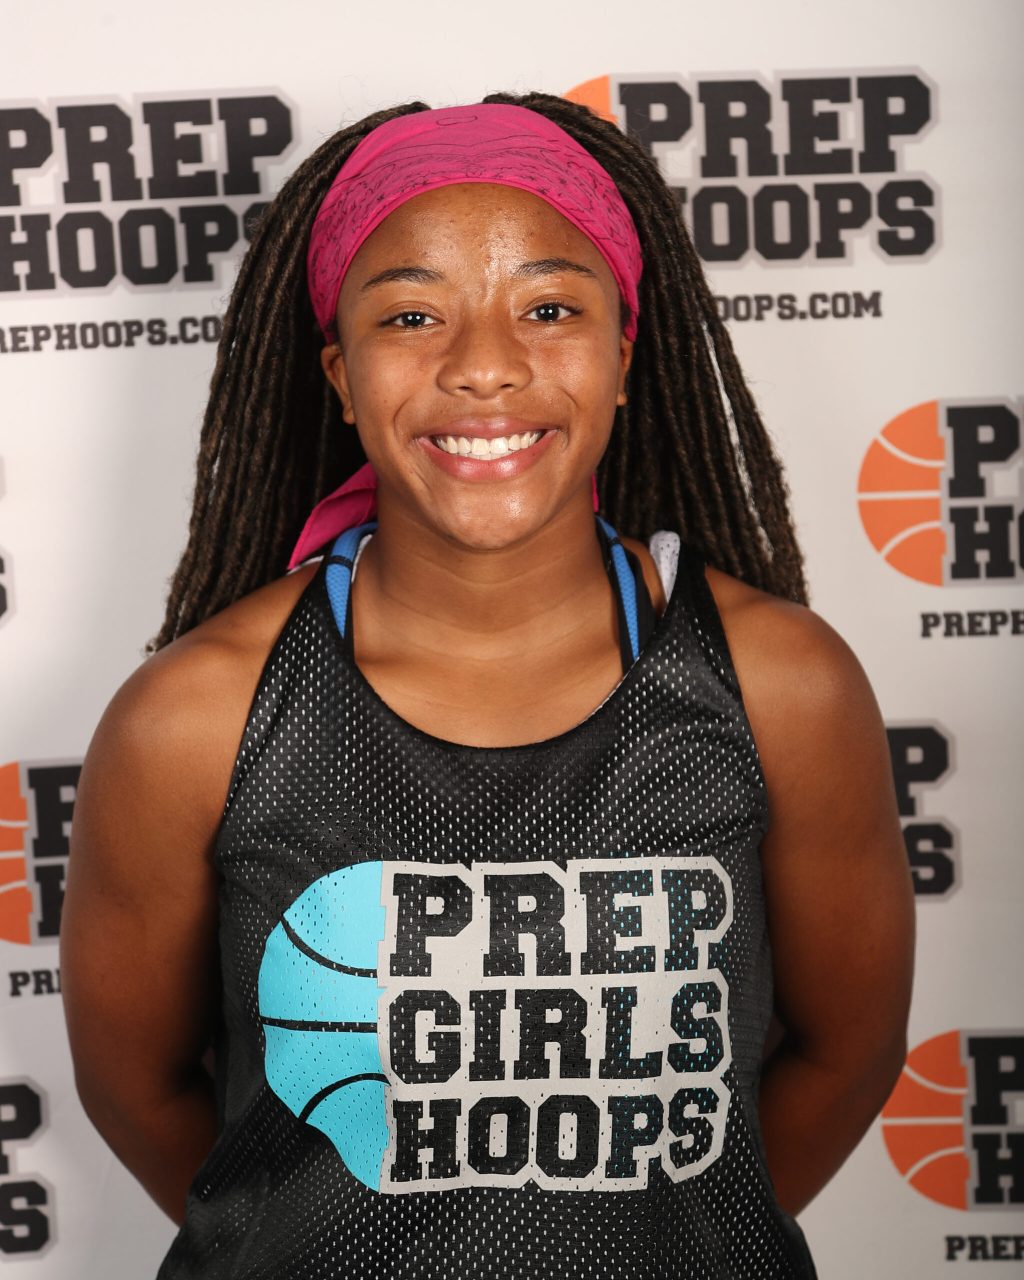 The Top Five Girls Point Guards in Arizona for 2021